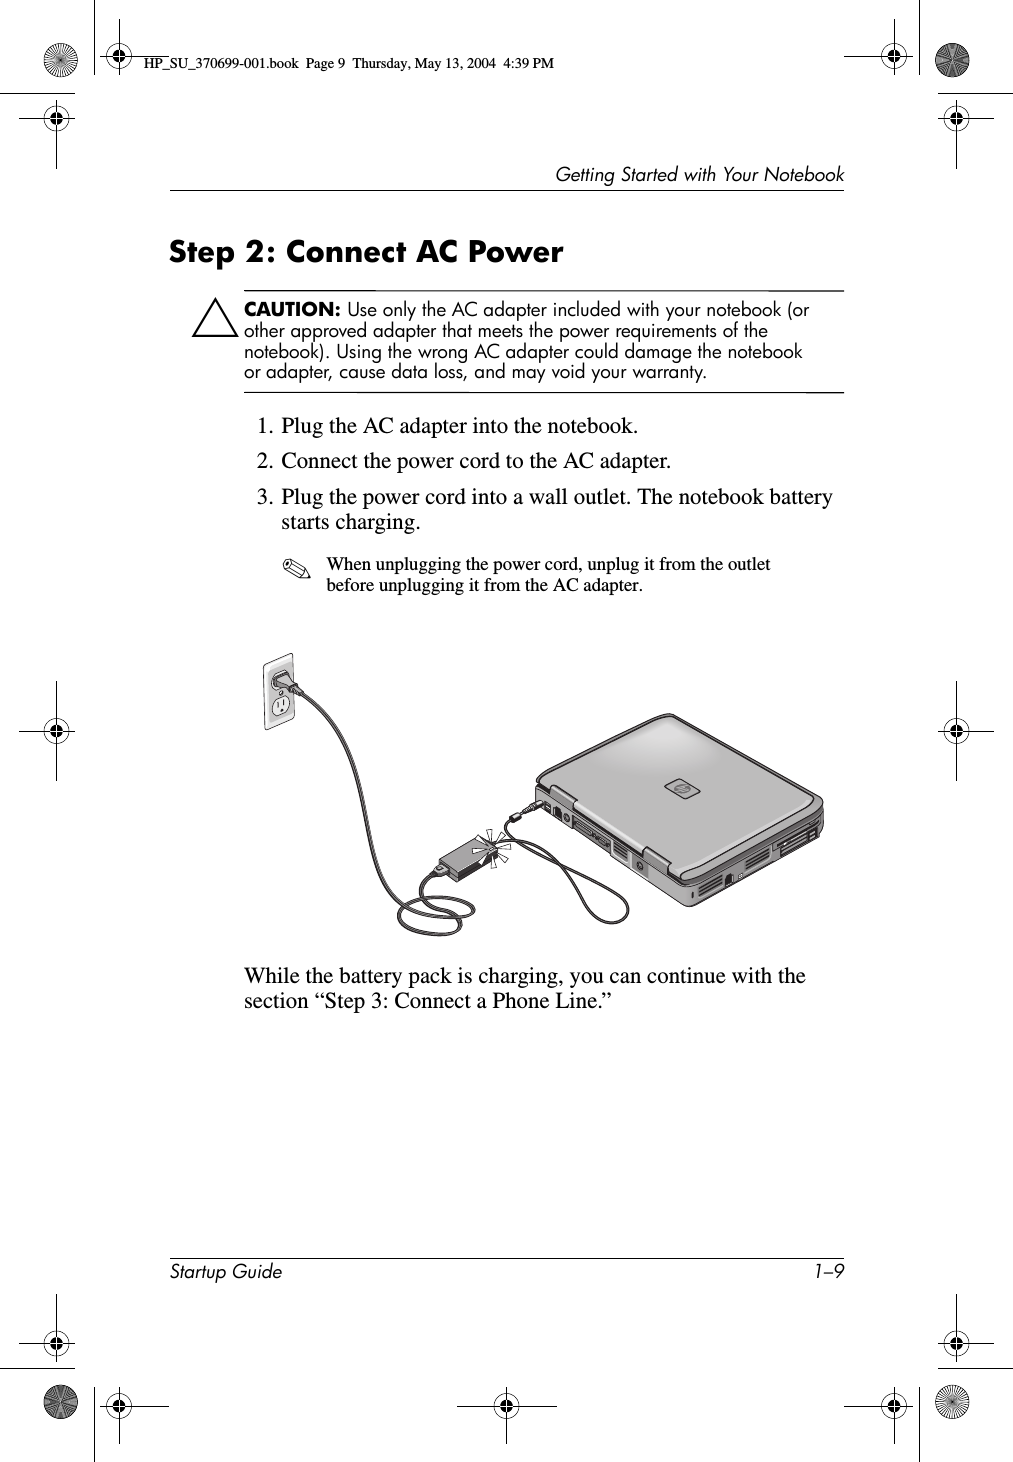 Getting Started with Your NotebookStartup Guide 1–9Step 2: Connect AC Power ÄCAUTION: Use only the AC adapter included with your notebook (or other approved adapter that meets the power requirements of the notebook). Using the wrong AC adapter could damage the notebook or adapter, cause data loss, and may void your warranty.1. Plug the AC adapter into the notebook.2. Connect the power cord to the AC adapter.3. Plug the power cord into a wall outlet. The notebook battery starts charging.✎When unplugging the power cord, unplug it from the outlet before unplugging it from the AC adapter.While the battery pack is charging, you can continue with the section “Step 3: Connect a Phone Line.”HP_SU_370699-001.book  Page 9  Thursday, May 13, 2004  4:39 PM